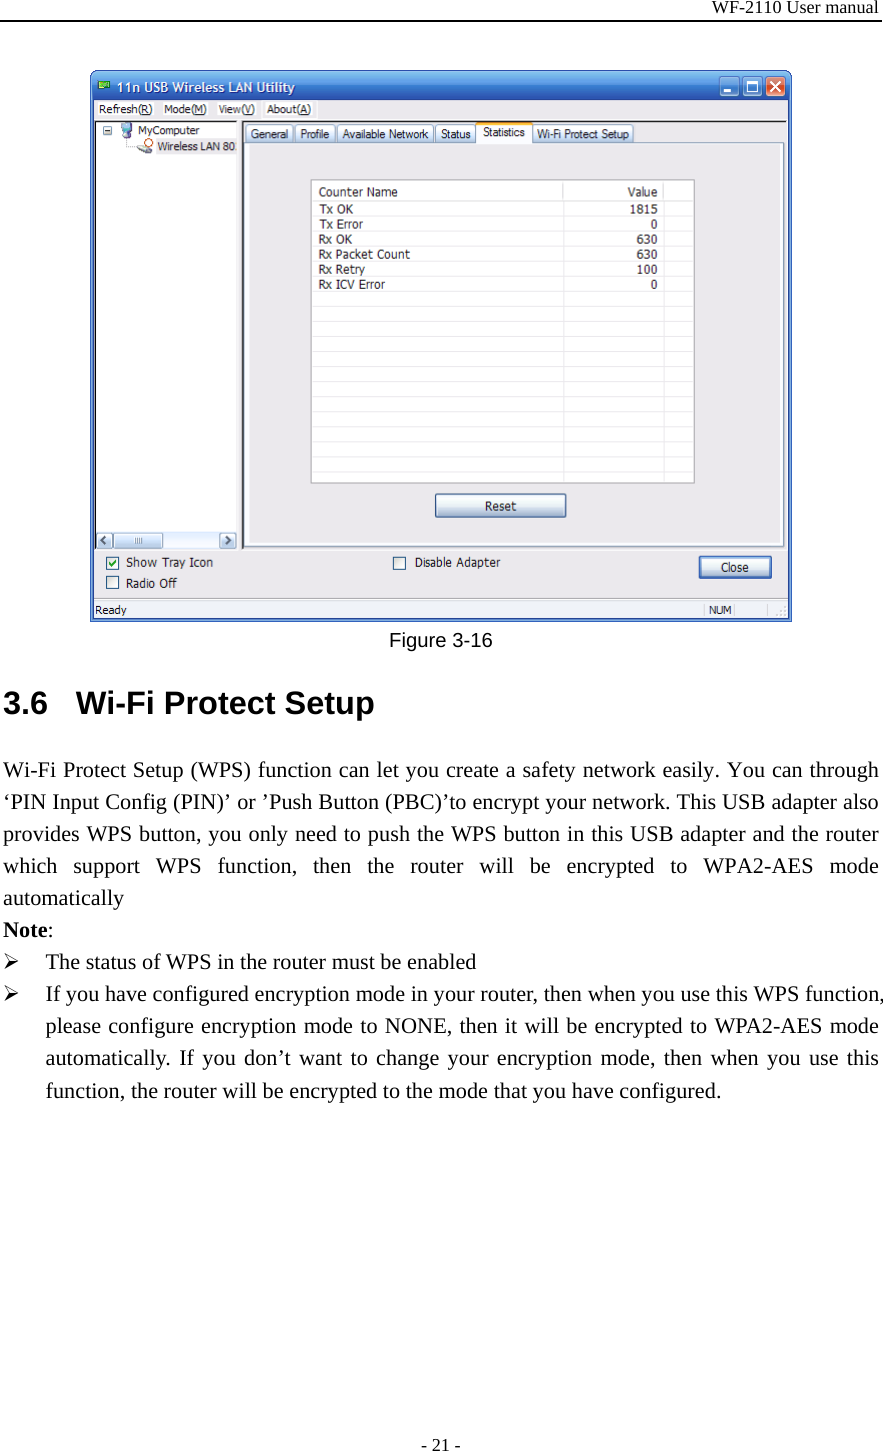 WF-2110 User manual - 21 -  Figure 3-16 3.6  Wi-Fi Protect Setup Wi-Fi Protect Setup (WPS) function can let you create a safety network easily. You can through ‘PIN Input Config (PIN)’ or ’Push Button (PBC)’to encrypt your network. This USB adapter also provides WPS button, you only need to push the WPS button in this USB adapter and the router which support WPS function, then the router will be encrypted to WPA2-AES mode automatically Note: ¾ The status of WPS in the router must be enabled ¾ If you have configured encryption mode in your router, then when you use this WPS function, please configure encryption mode to NONE, then it will be encrypted to WPA2-AES mode automatically. If you don’t want to change your encryption mode, then when you use this function, the router will be encrypted to the mode that you have configured. 